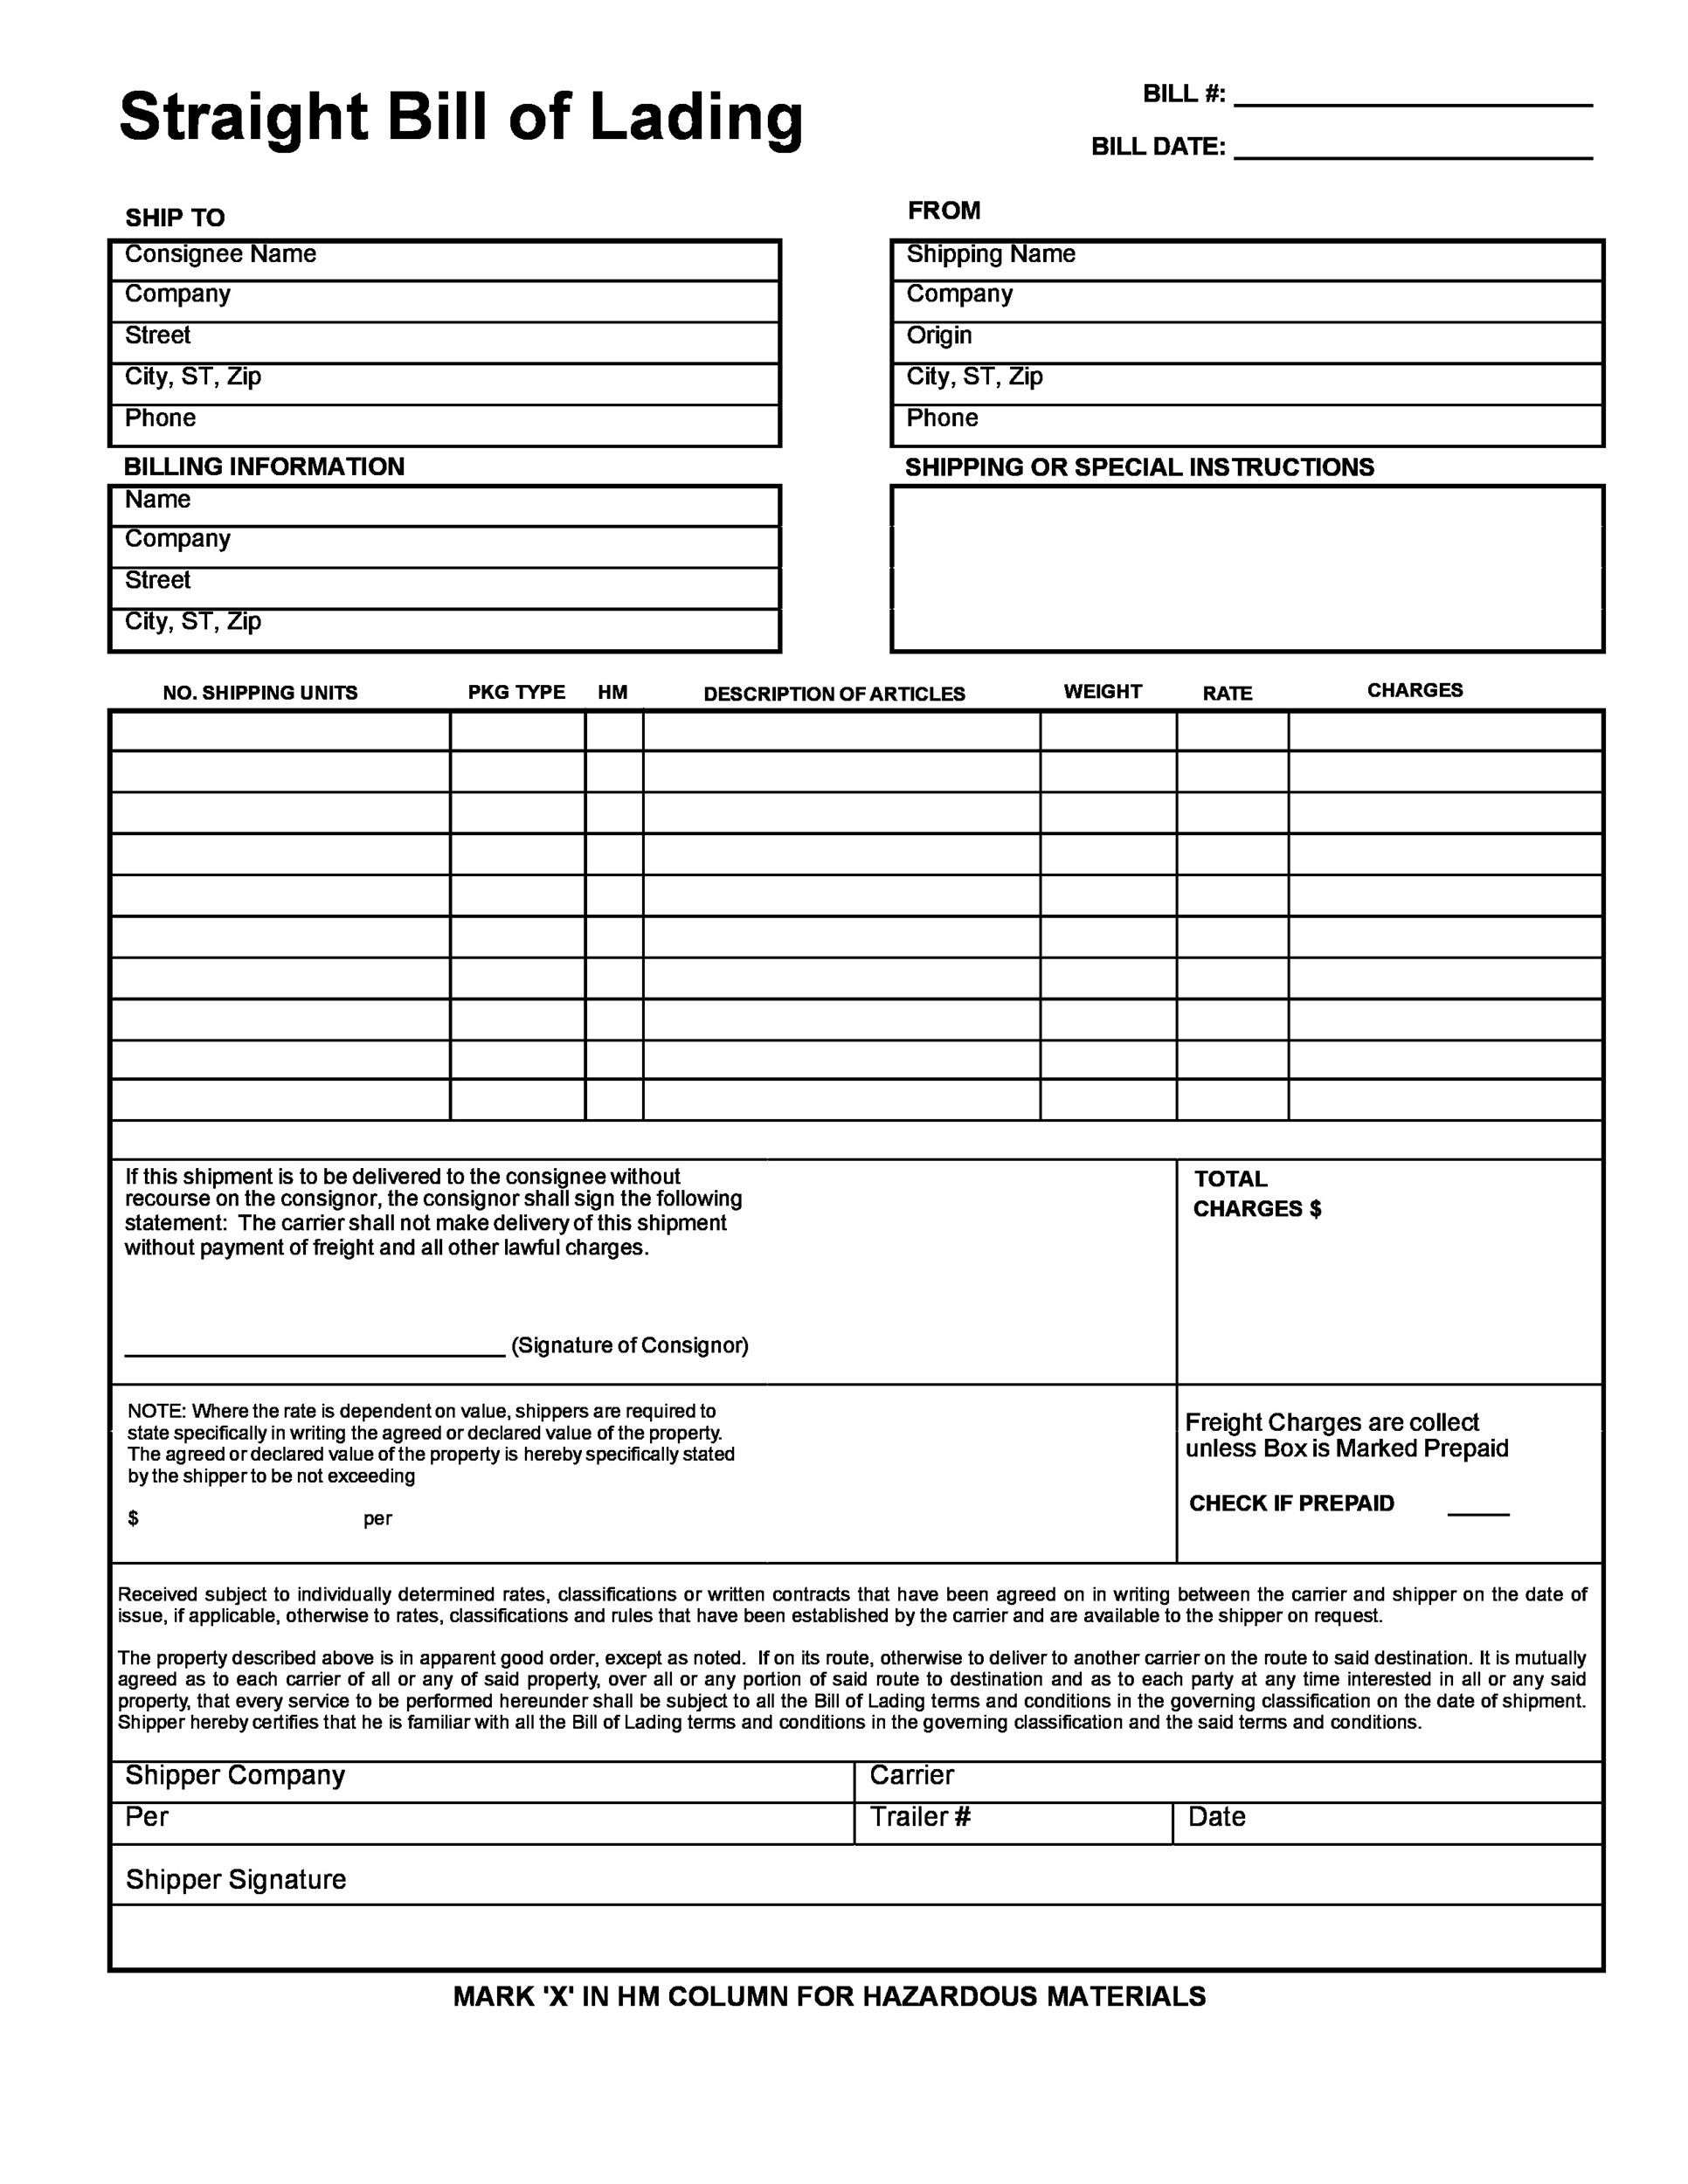 printable-bill-of-lading-forms-free-printable-forms-free-online